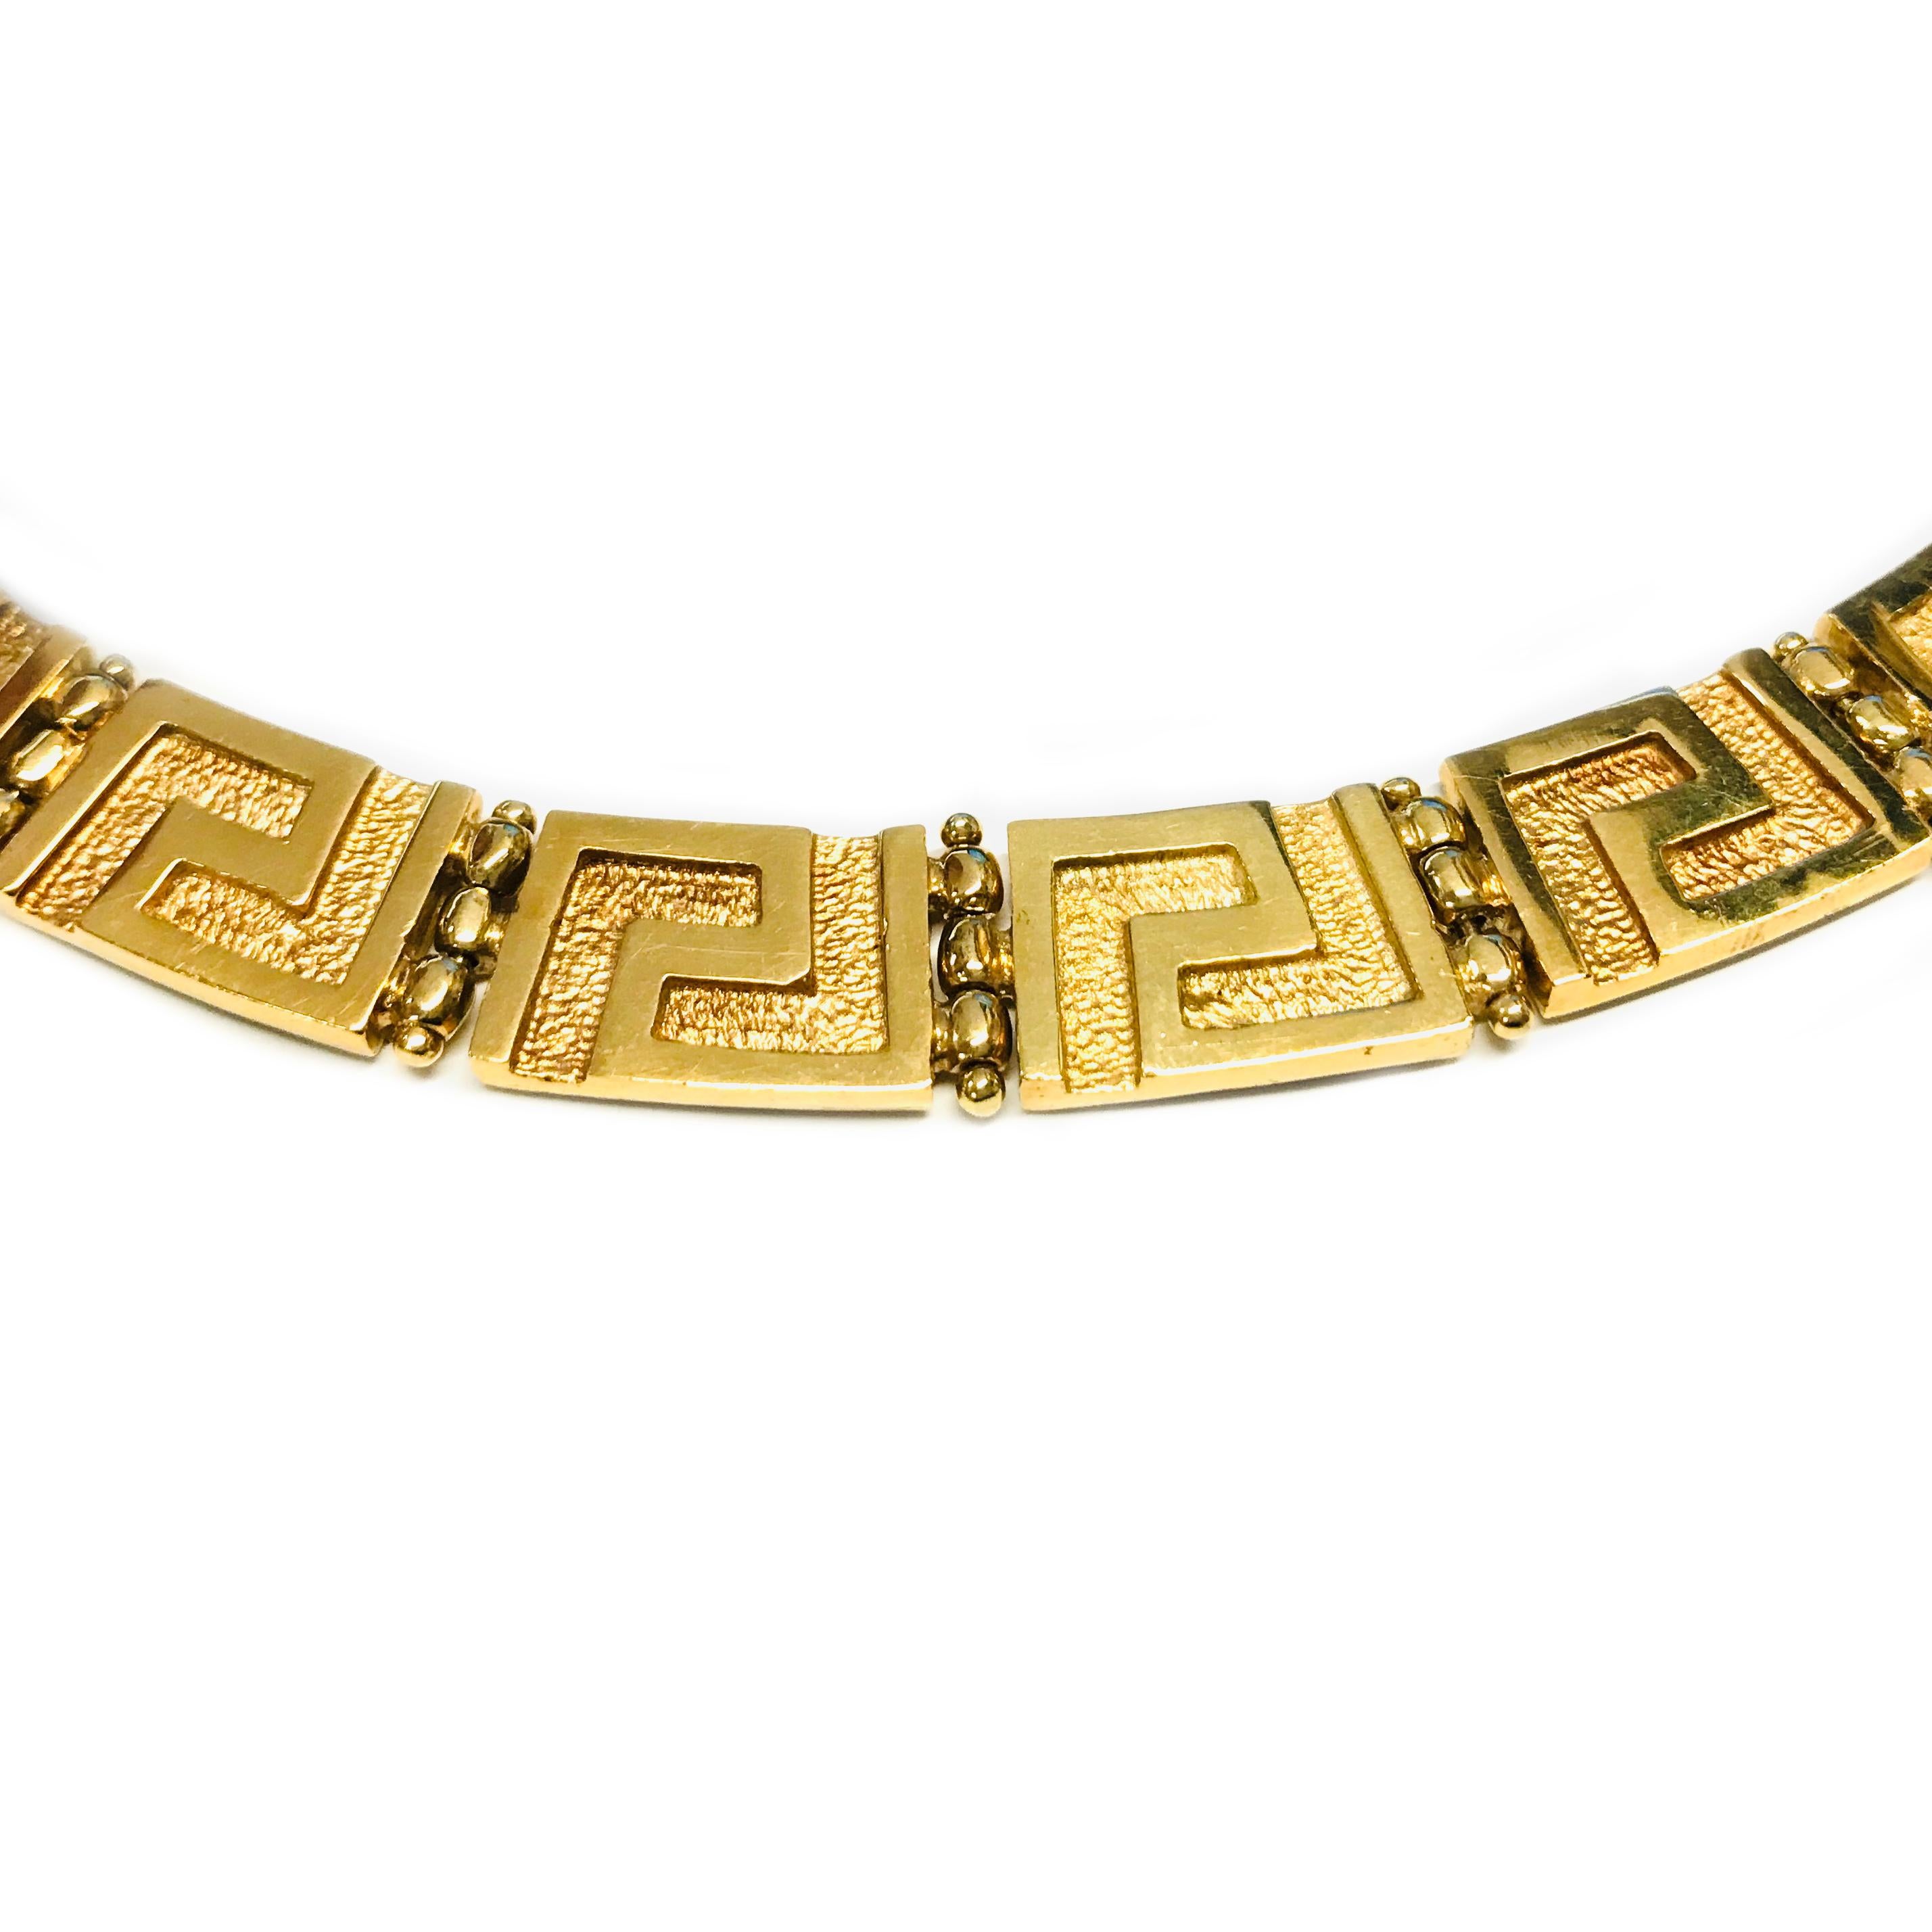 18 Karat Gold Greek Meander Necklace. The necklace consists of rectangular gold Greek key motifs and hinged gold beads. The width of the necklace is 11.3mm. Engraved in script on the back of the clasp is JBG with an 18K stamp. The necklace has a box